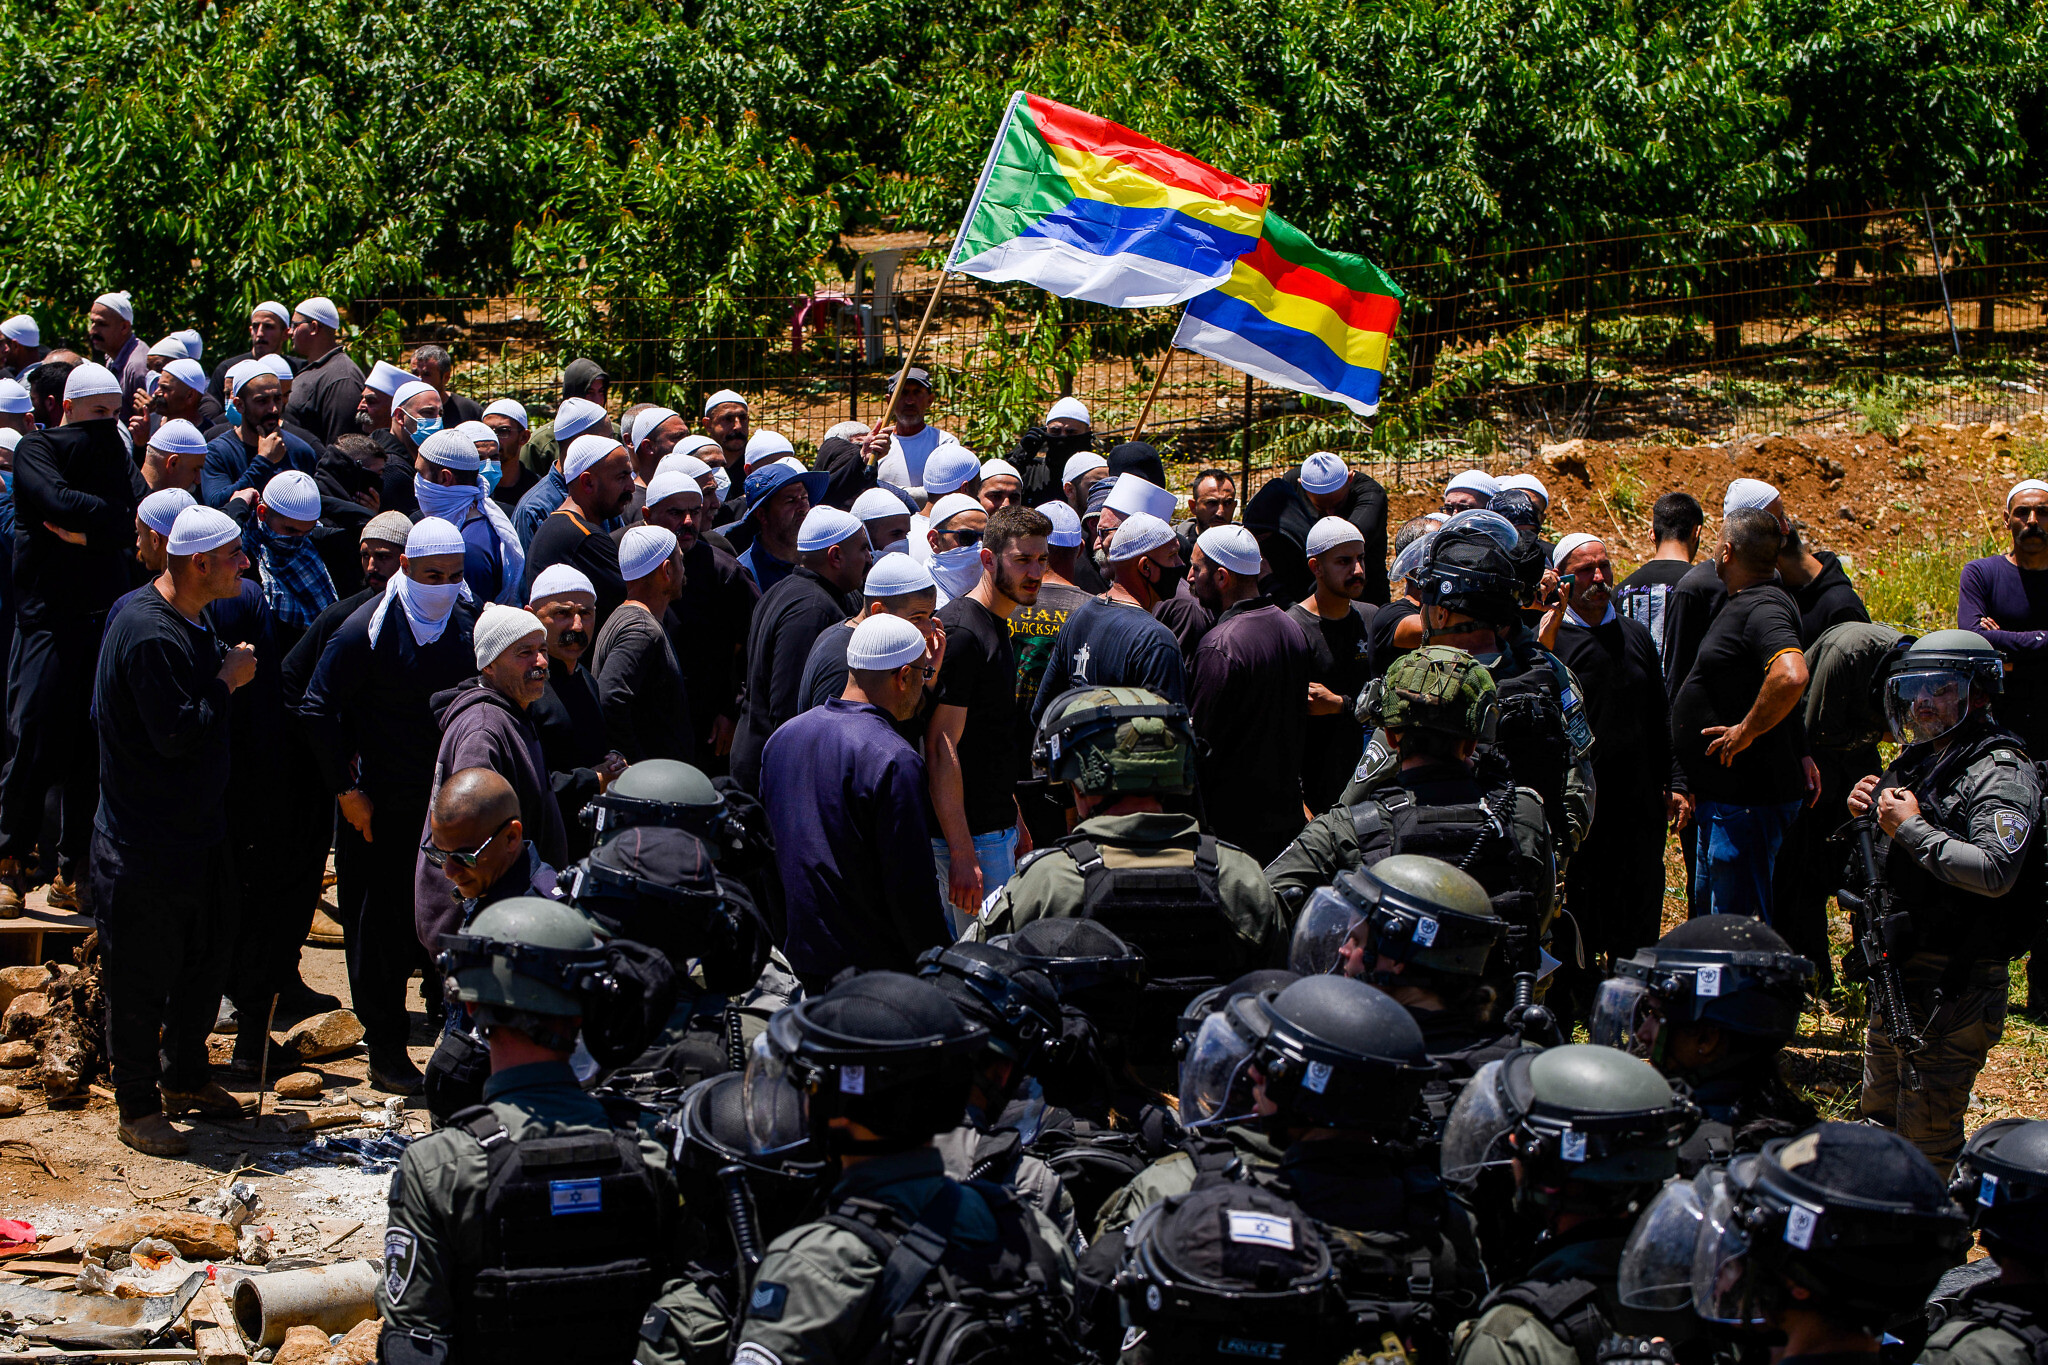 Several hurt in clashes in Golan Heights as Druze protest wind farm ...